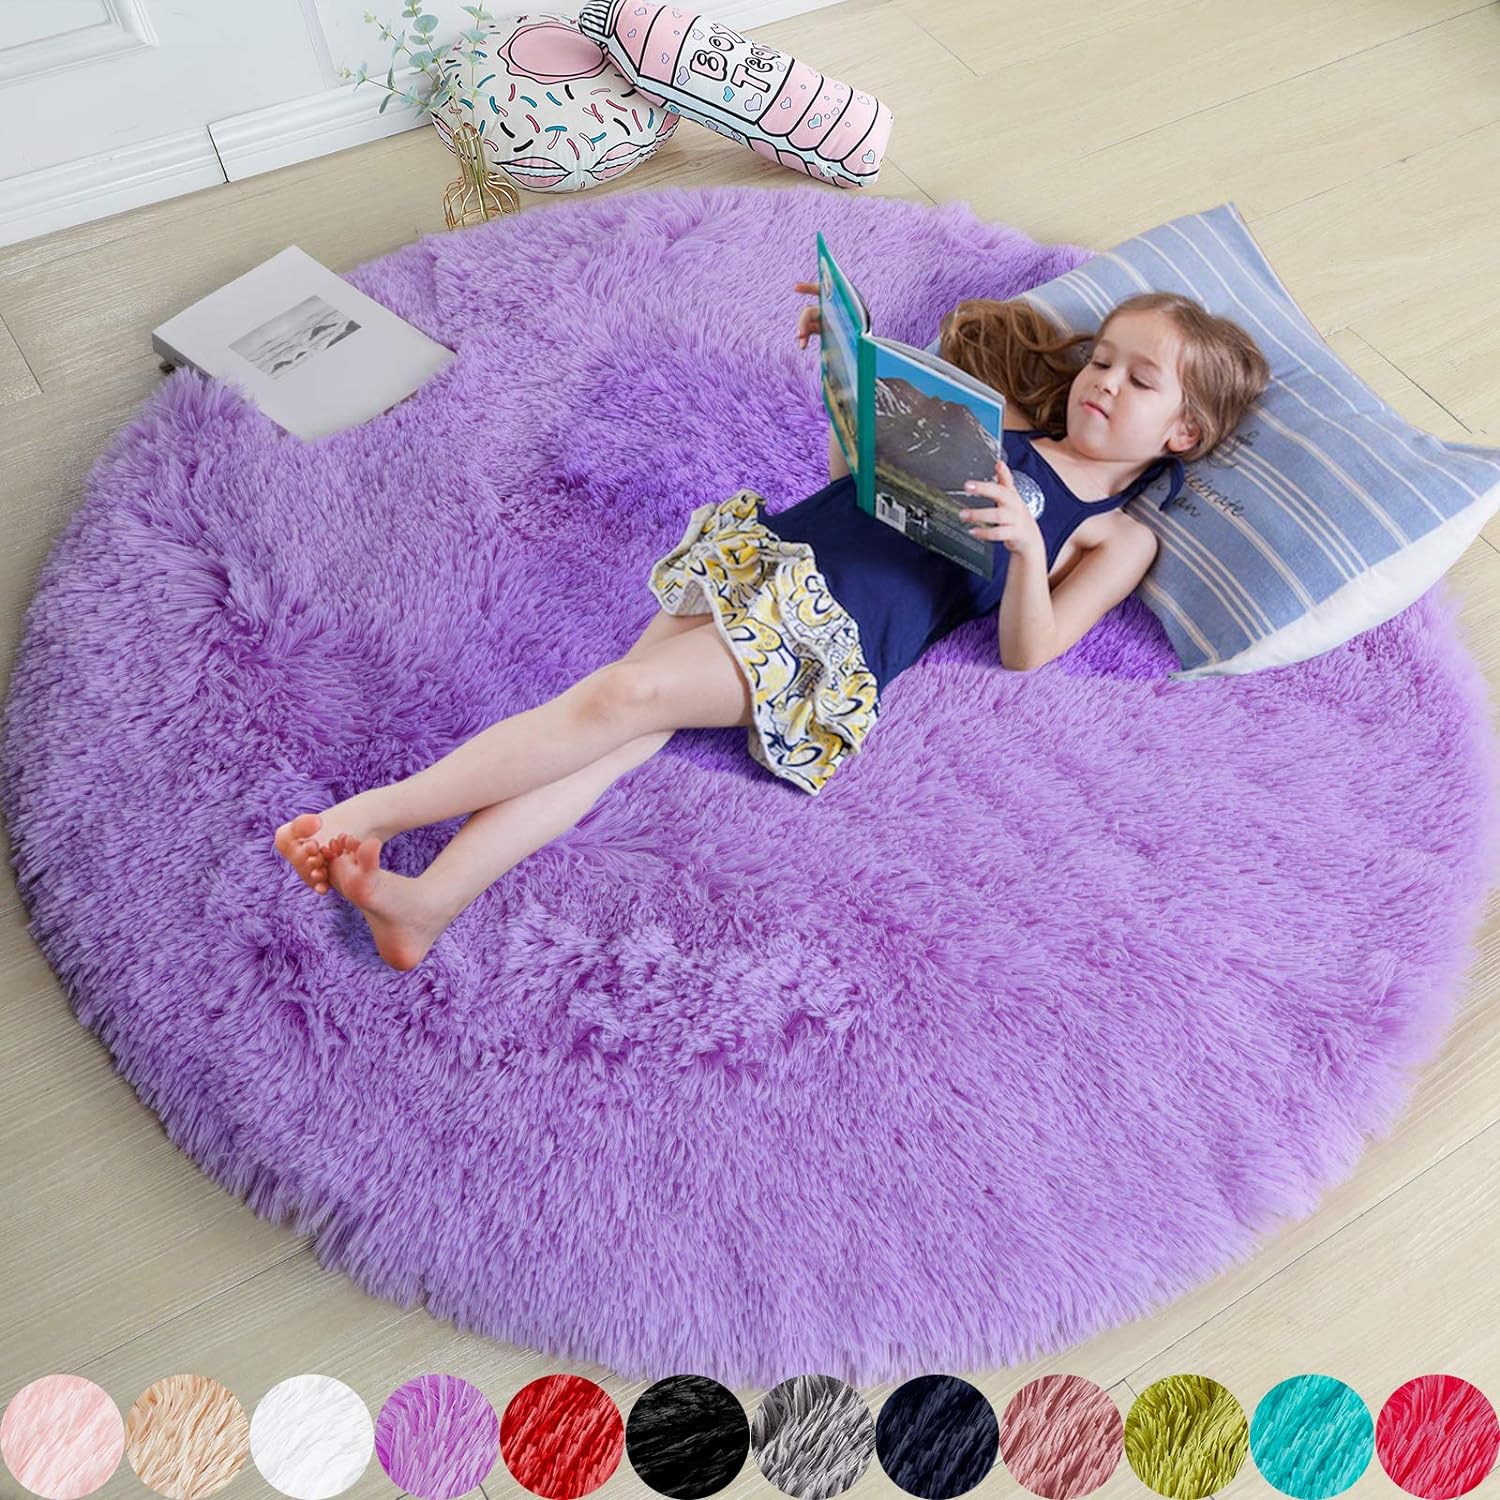 The best Christmas gift ideas for teen girls: round rug